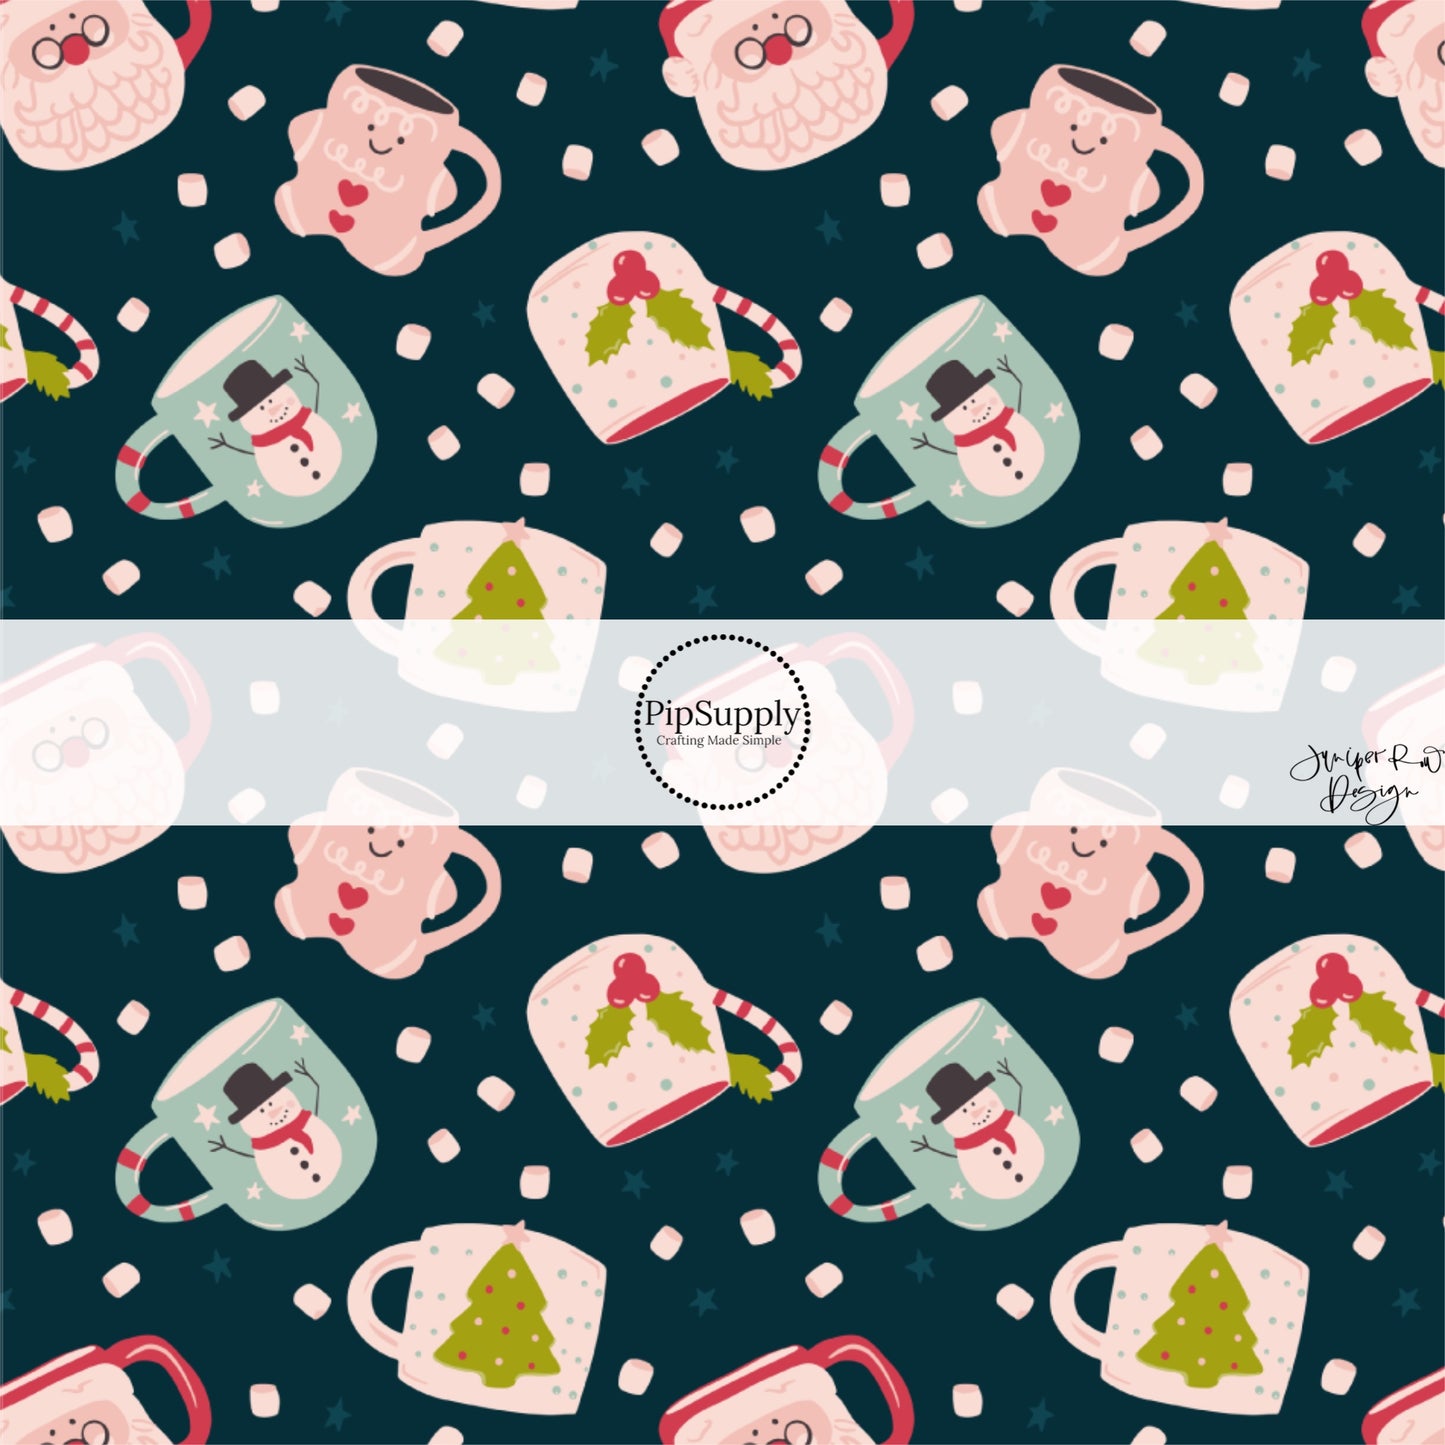 These holiday pattern themed fabric by the yard features light pink and light blue mugs surrounded by marshmallows on dark blue. This fun Christmas fabric can be used for all your sewing and crafting needs!